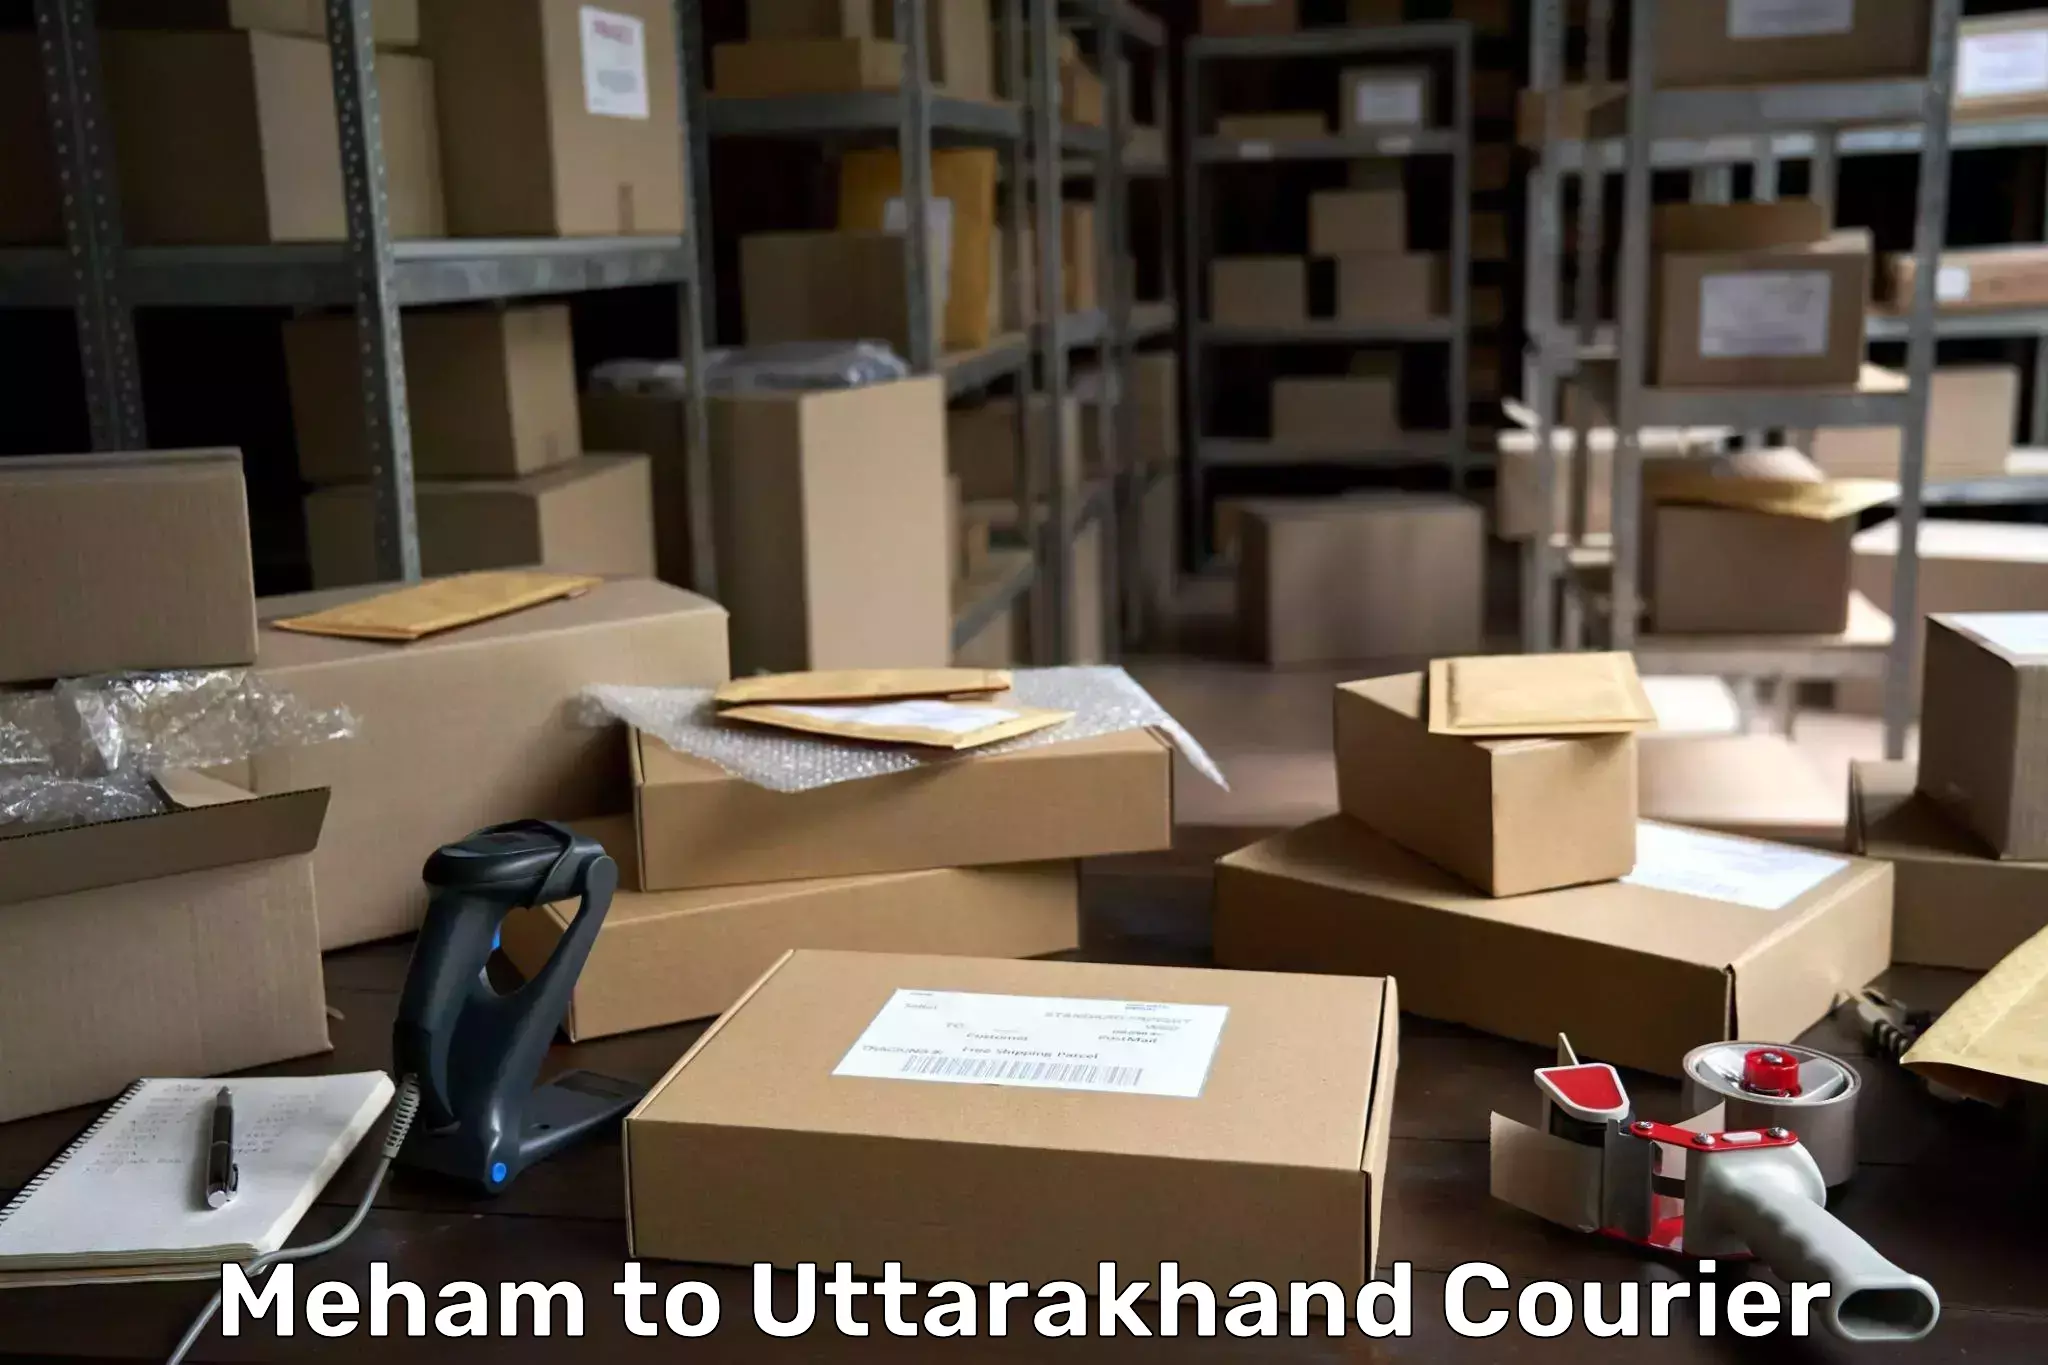 Automated parcel services Meham to Uttarakhand